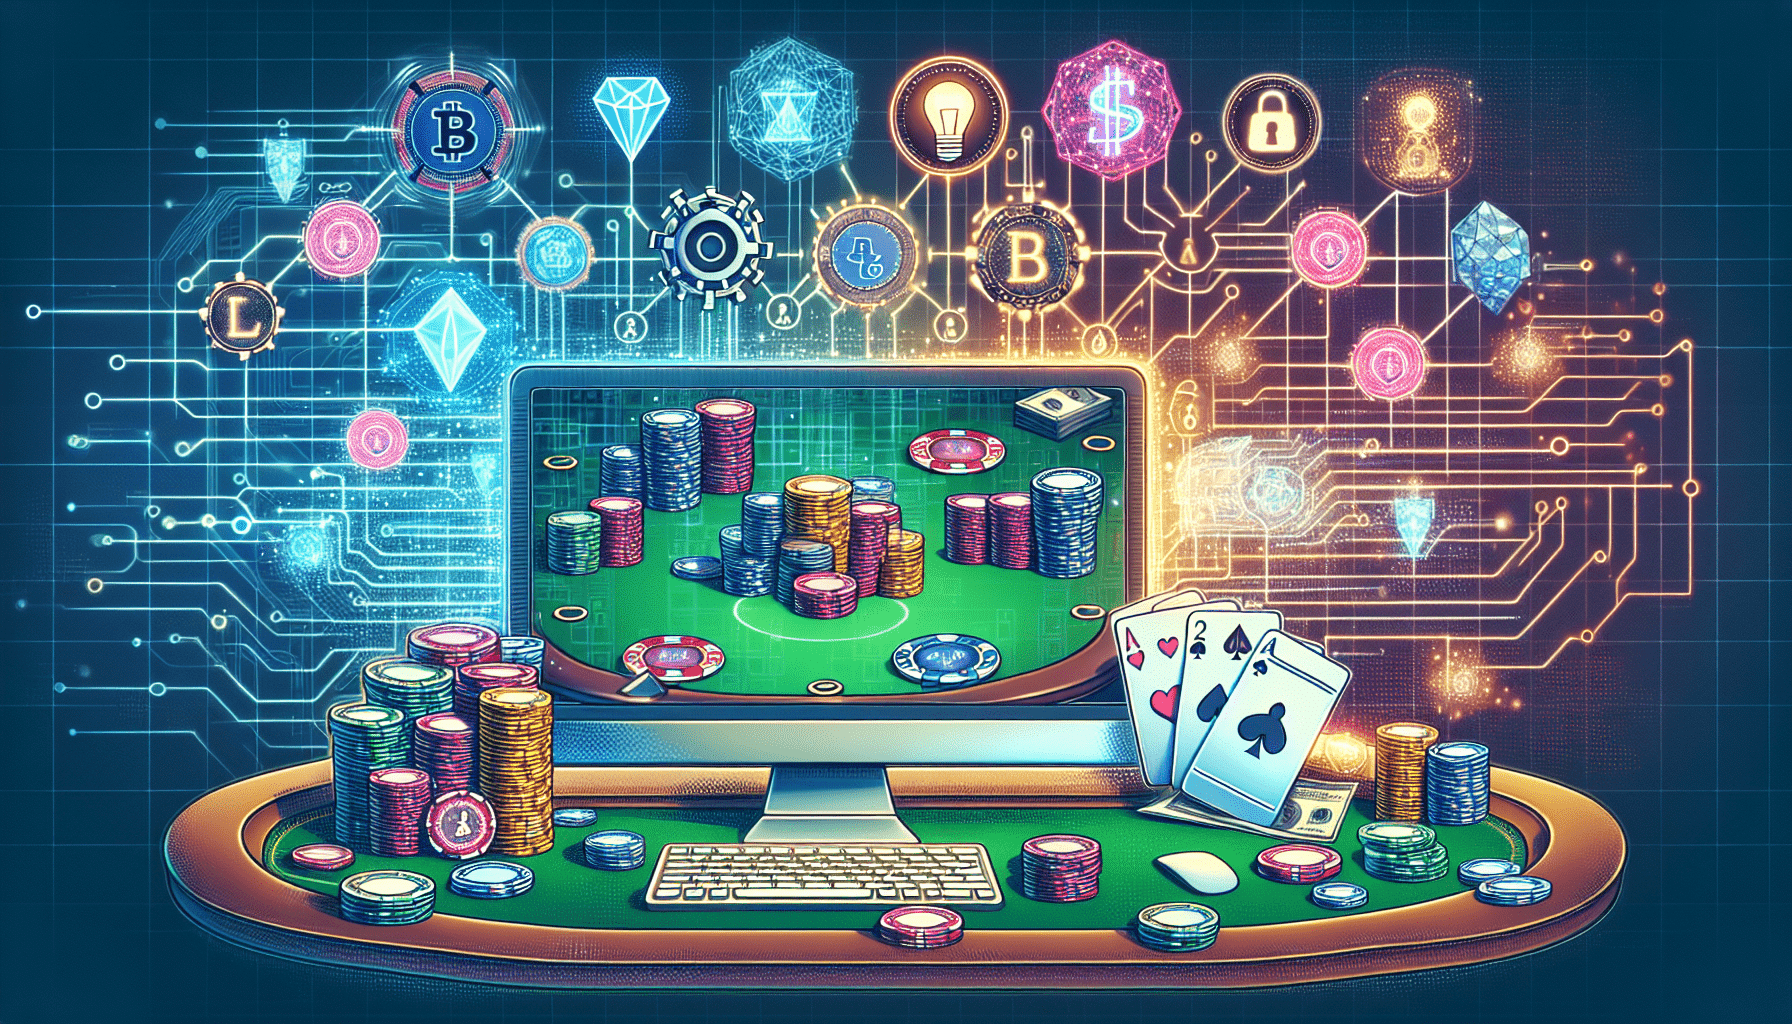 What Are The Benefits Of Using Cryptocurrencies For Online Gambling?